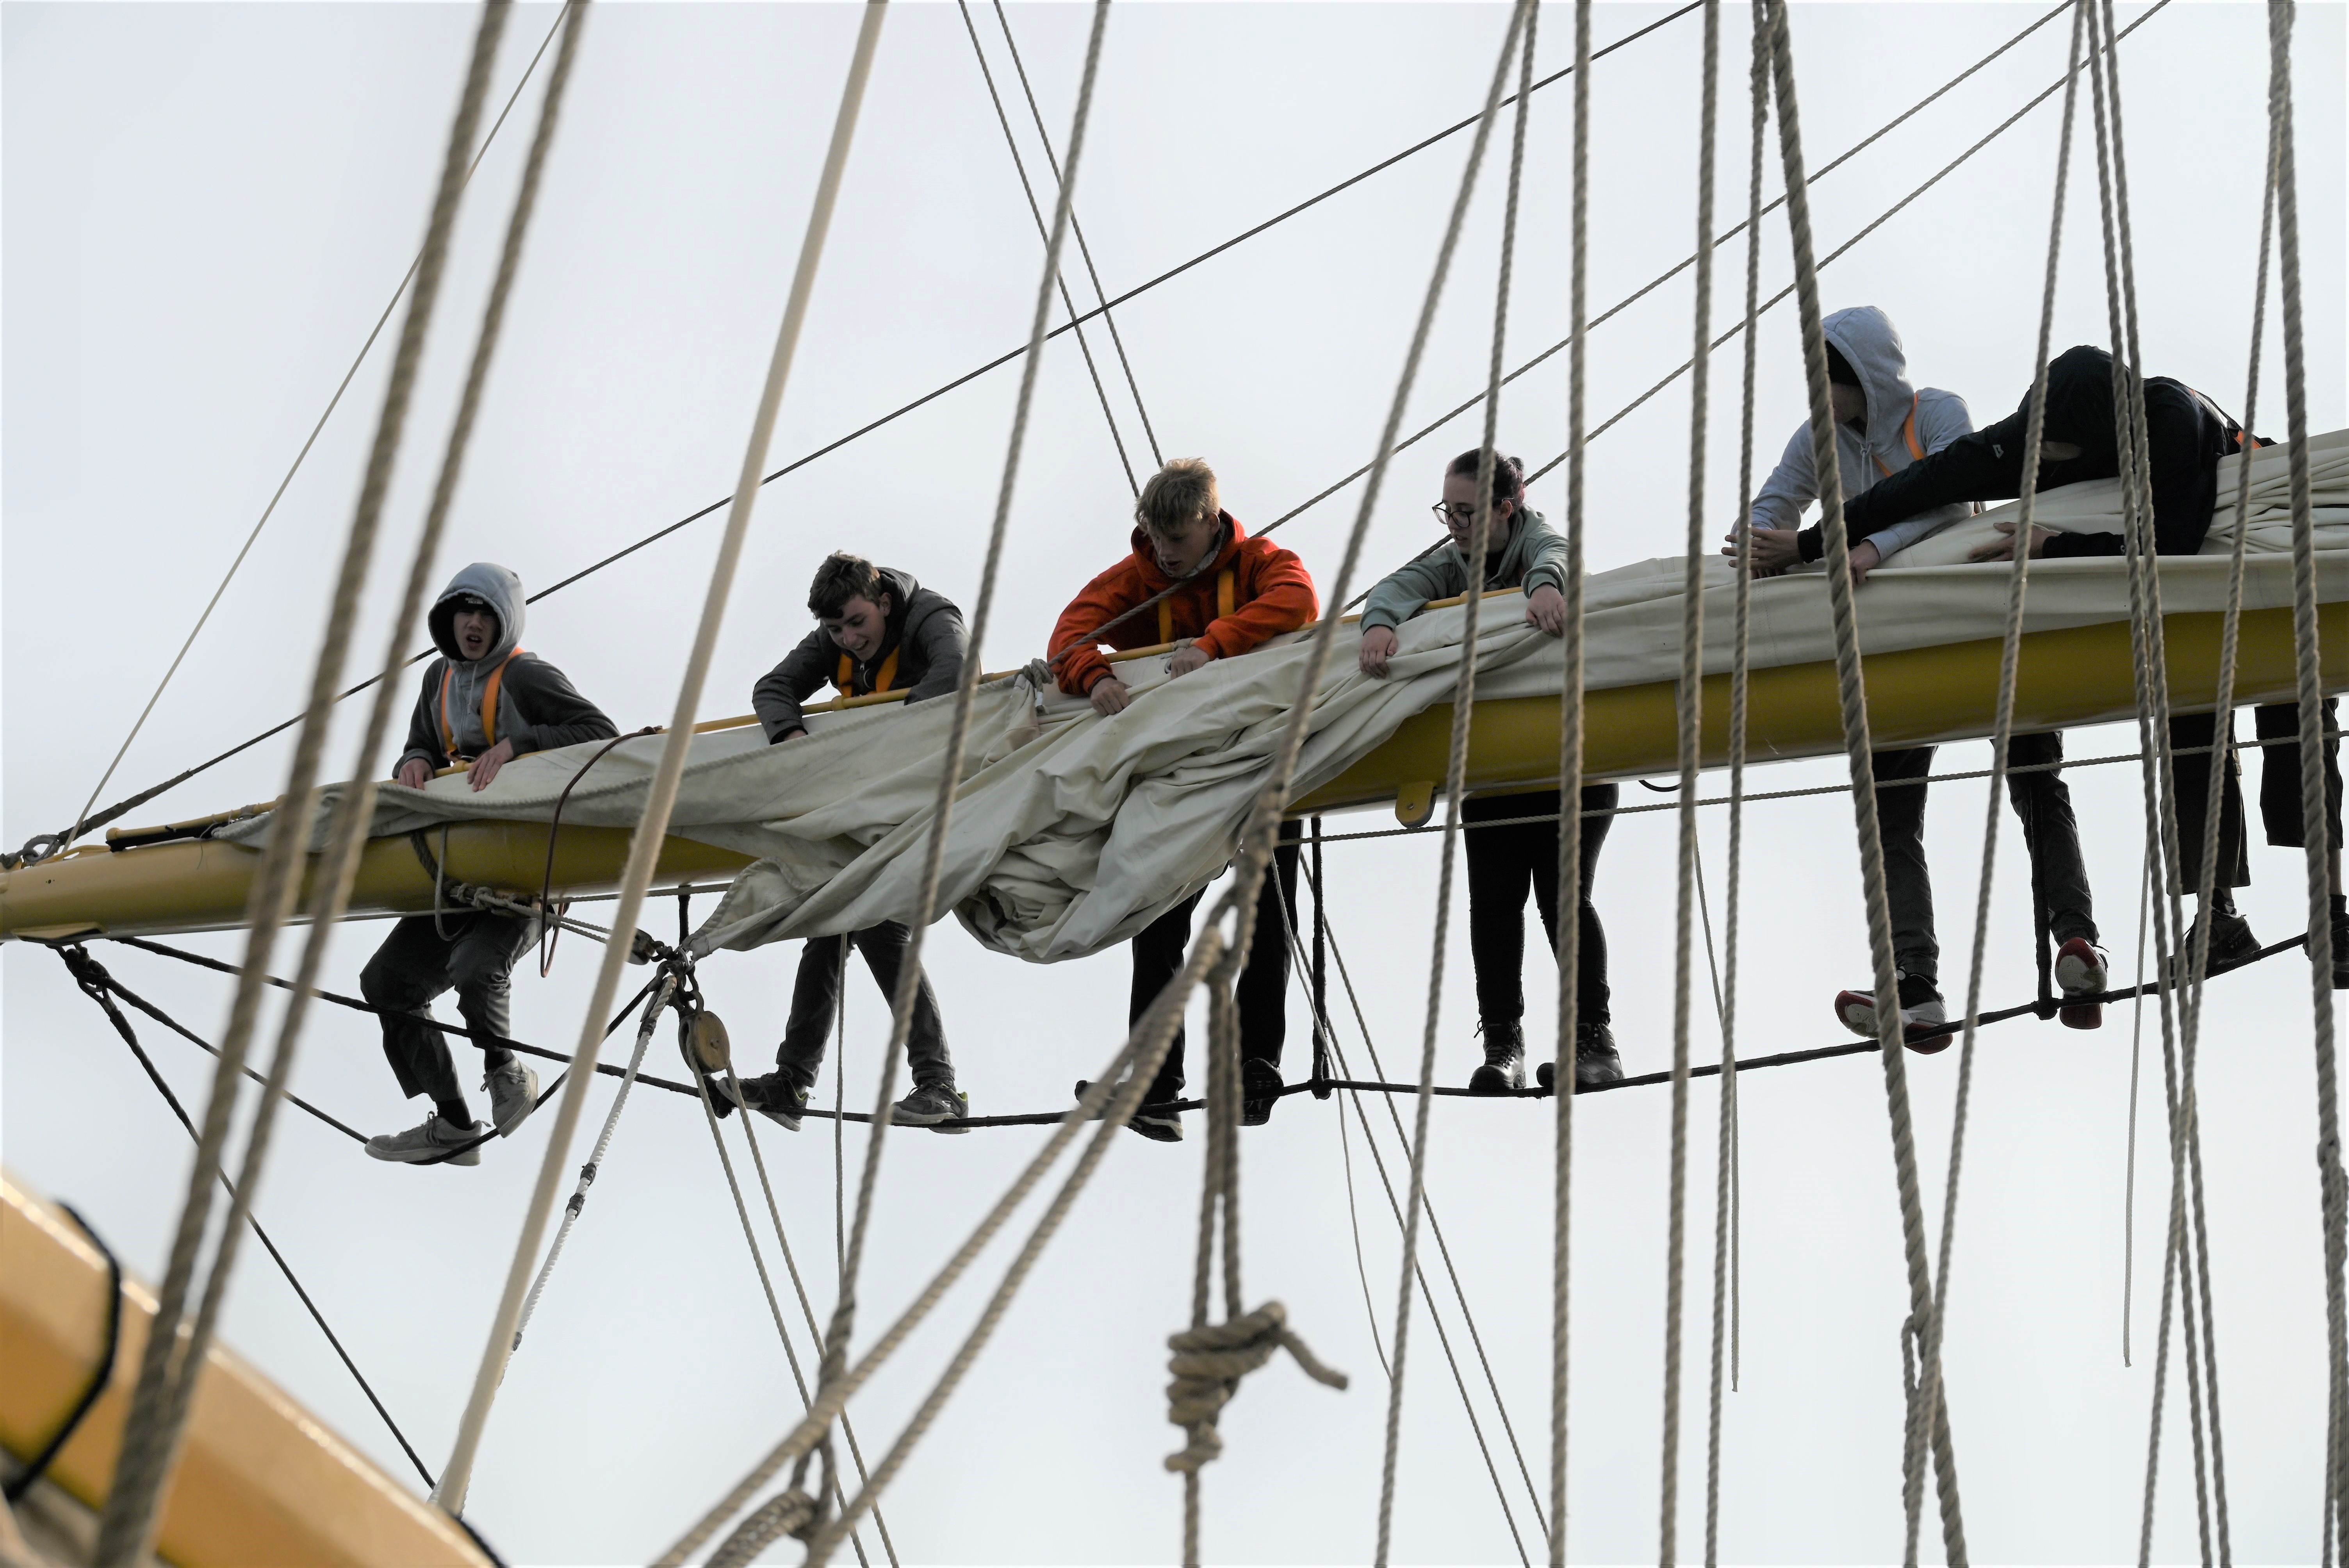 Trainees on the yard of the Pelican of London, stowing sails